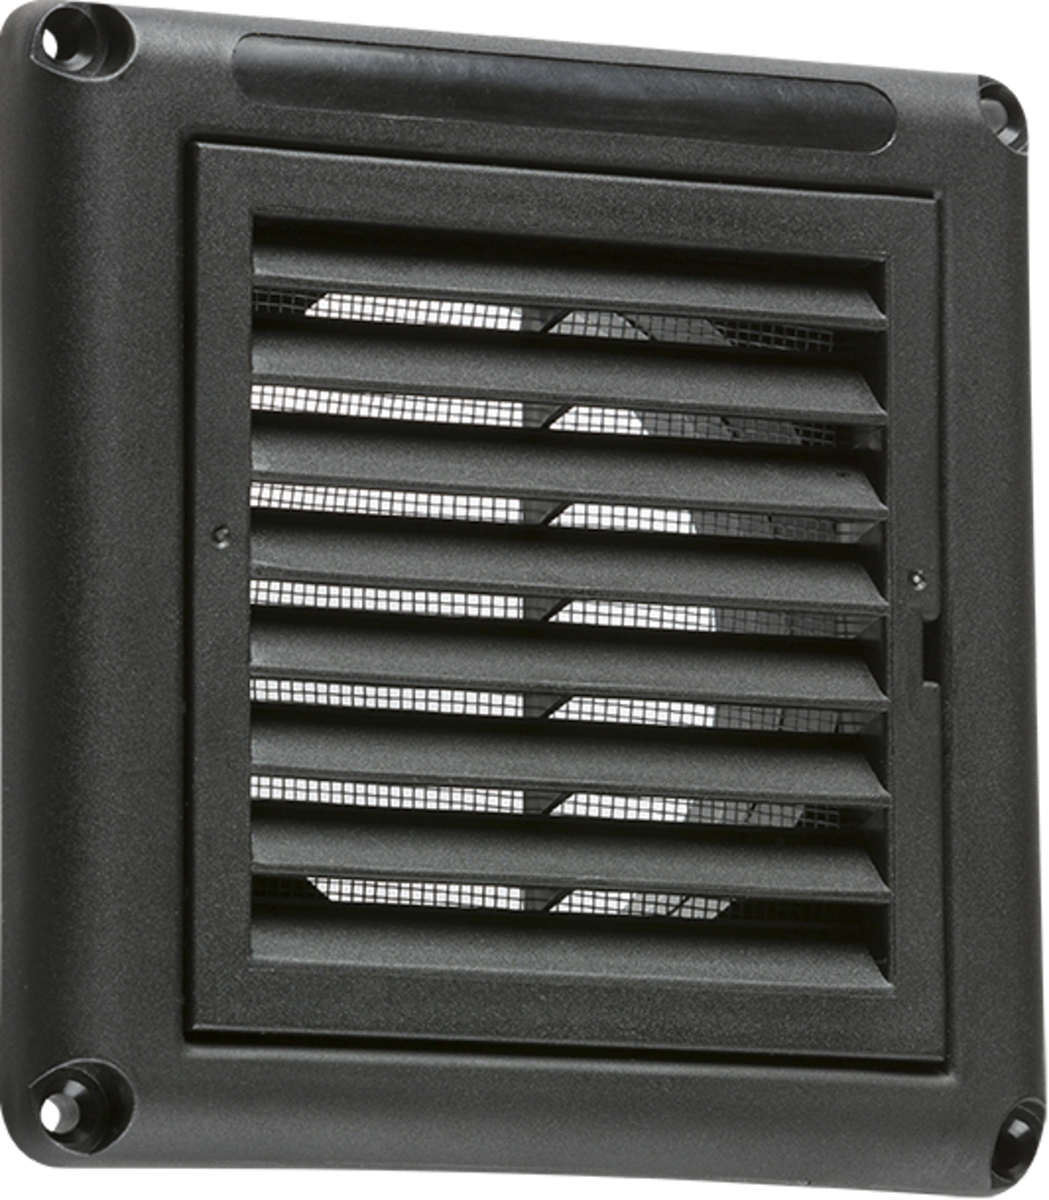 100mm/4 inch Extractor Fan Grille with Fly Screen - Black